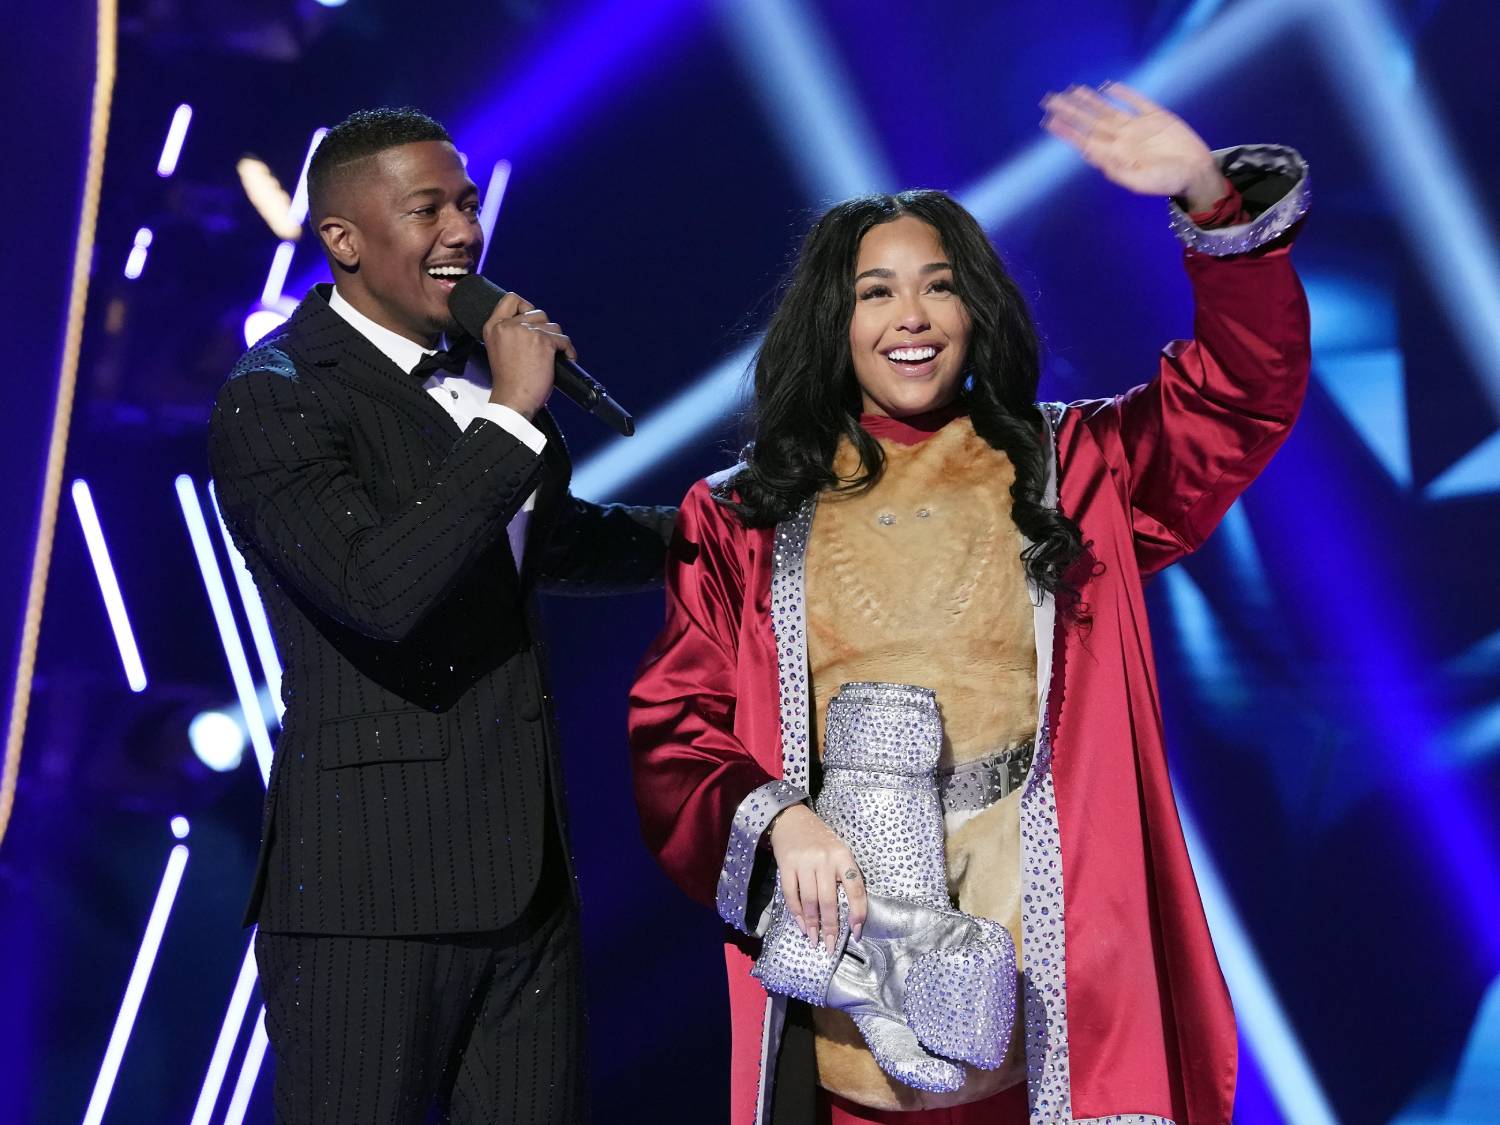 L-R: Host Nick Cannon and Jordyn Woods in the The Mother Of All Final Face Offs, Part 1 episode of THE MASKED SINGER airing Wednesday, April 8 (8:00-9:01 PM ET/PT) on FOX.